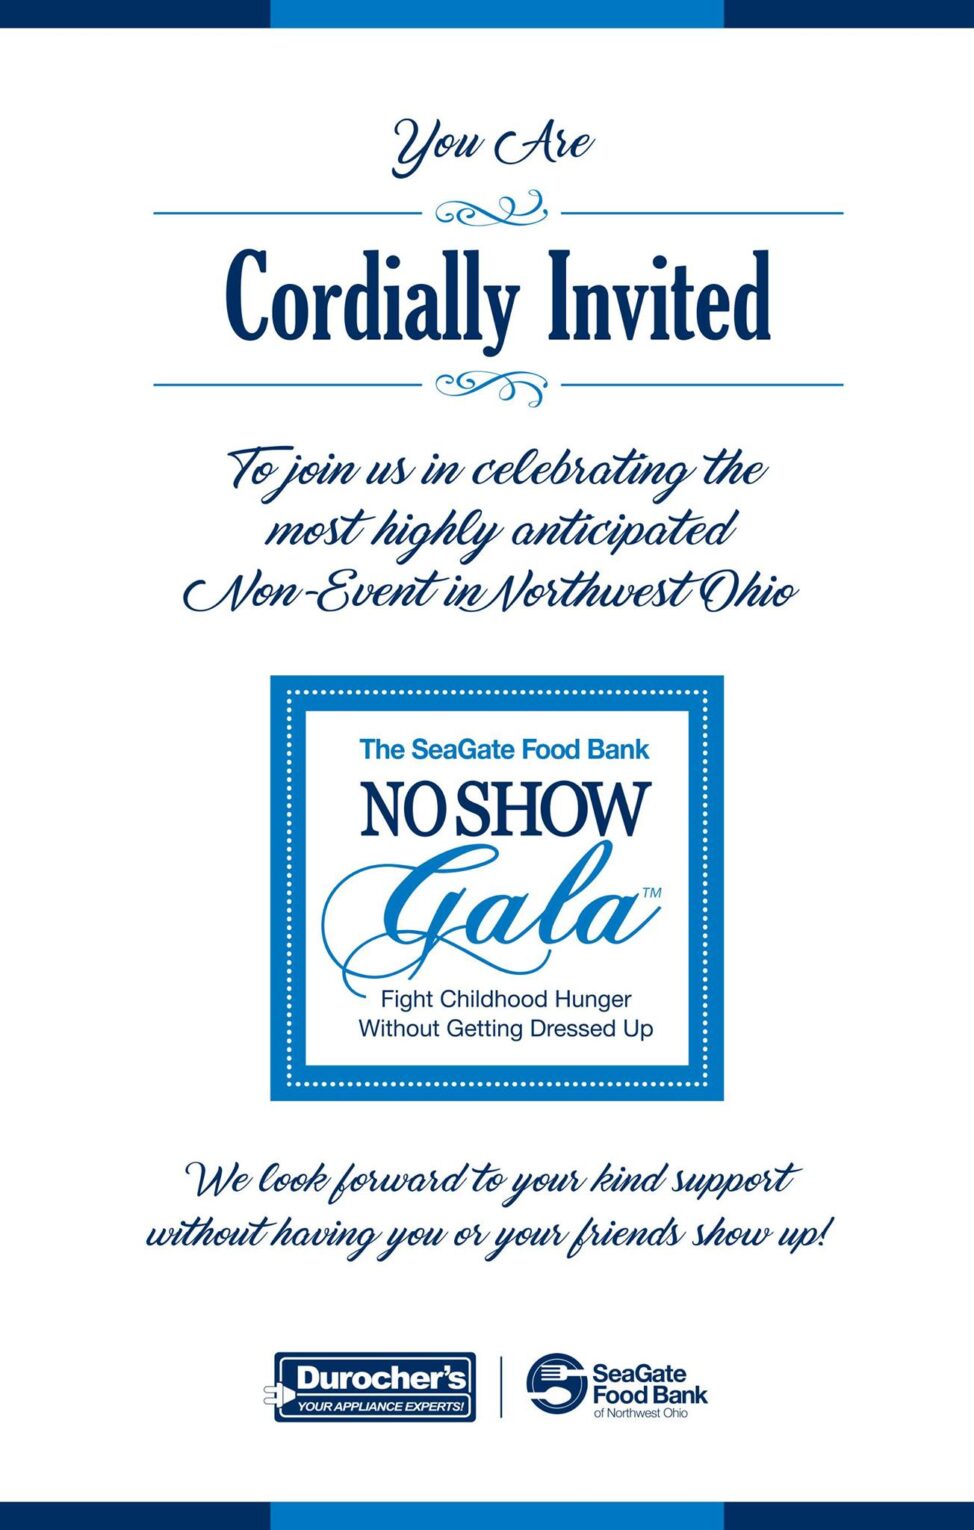 The tickets for our Annual No Show Gala